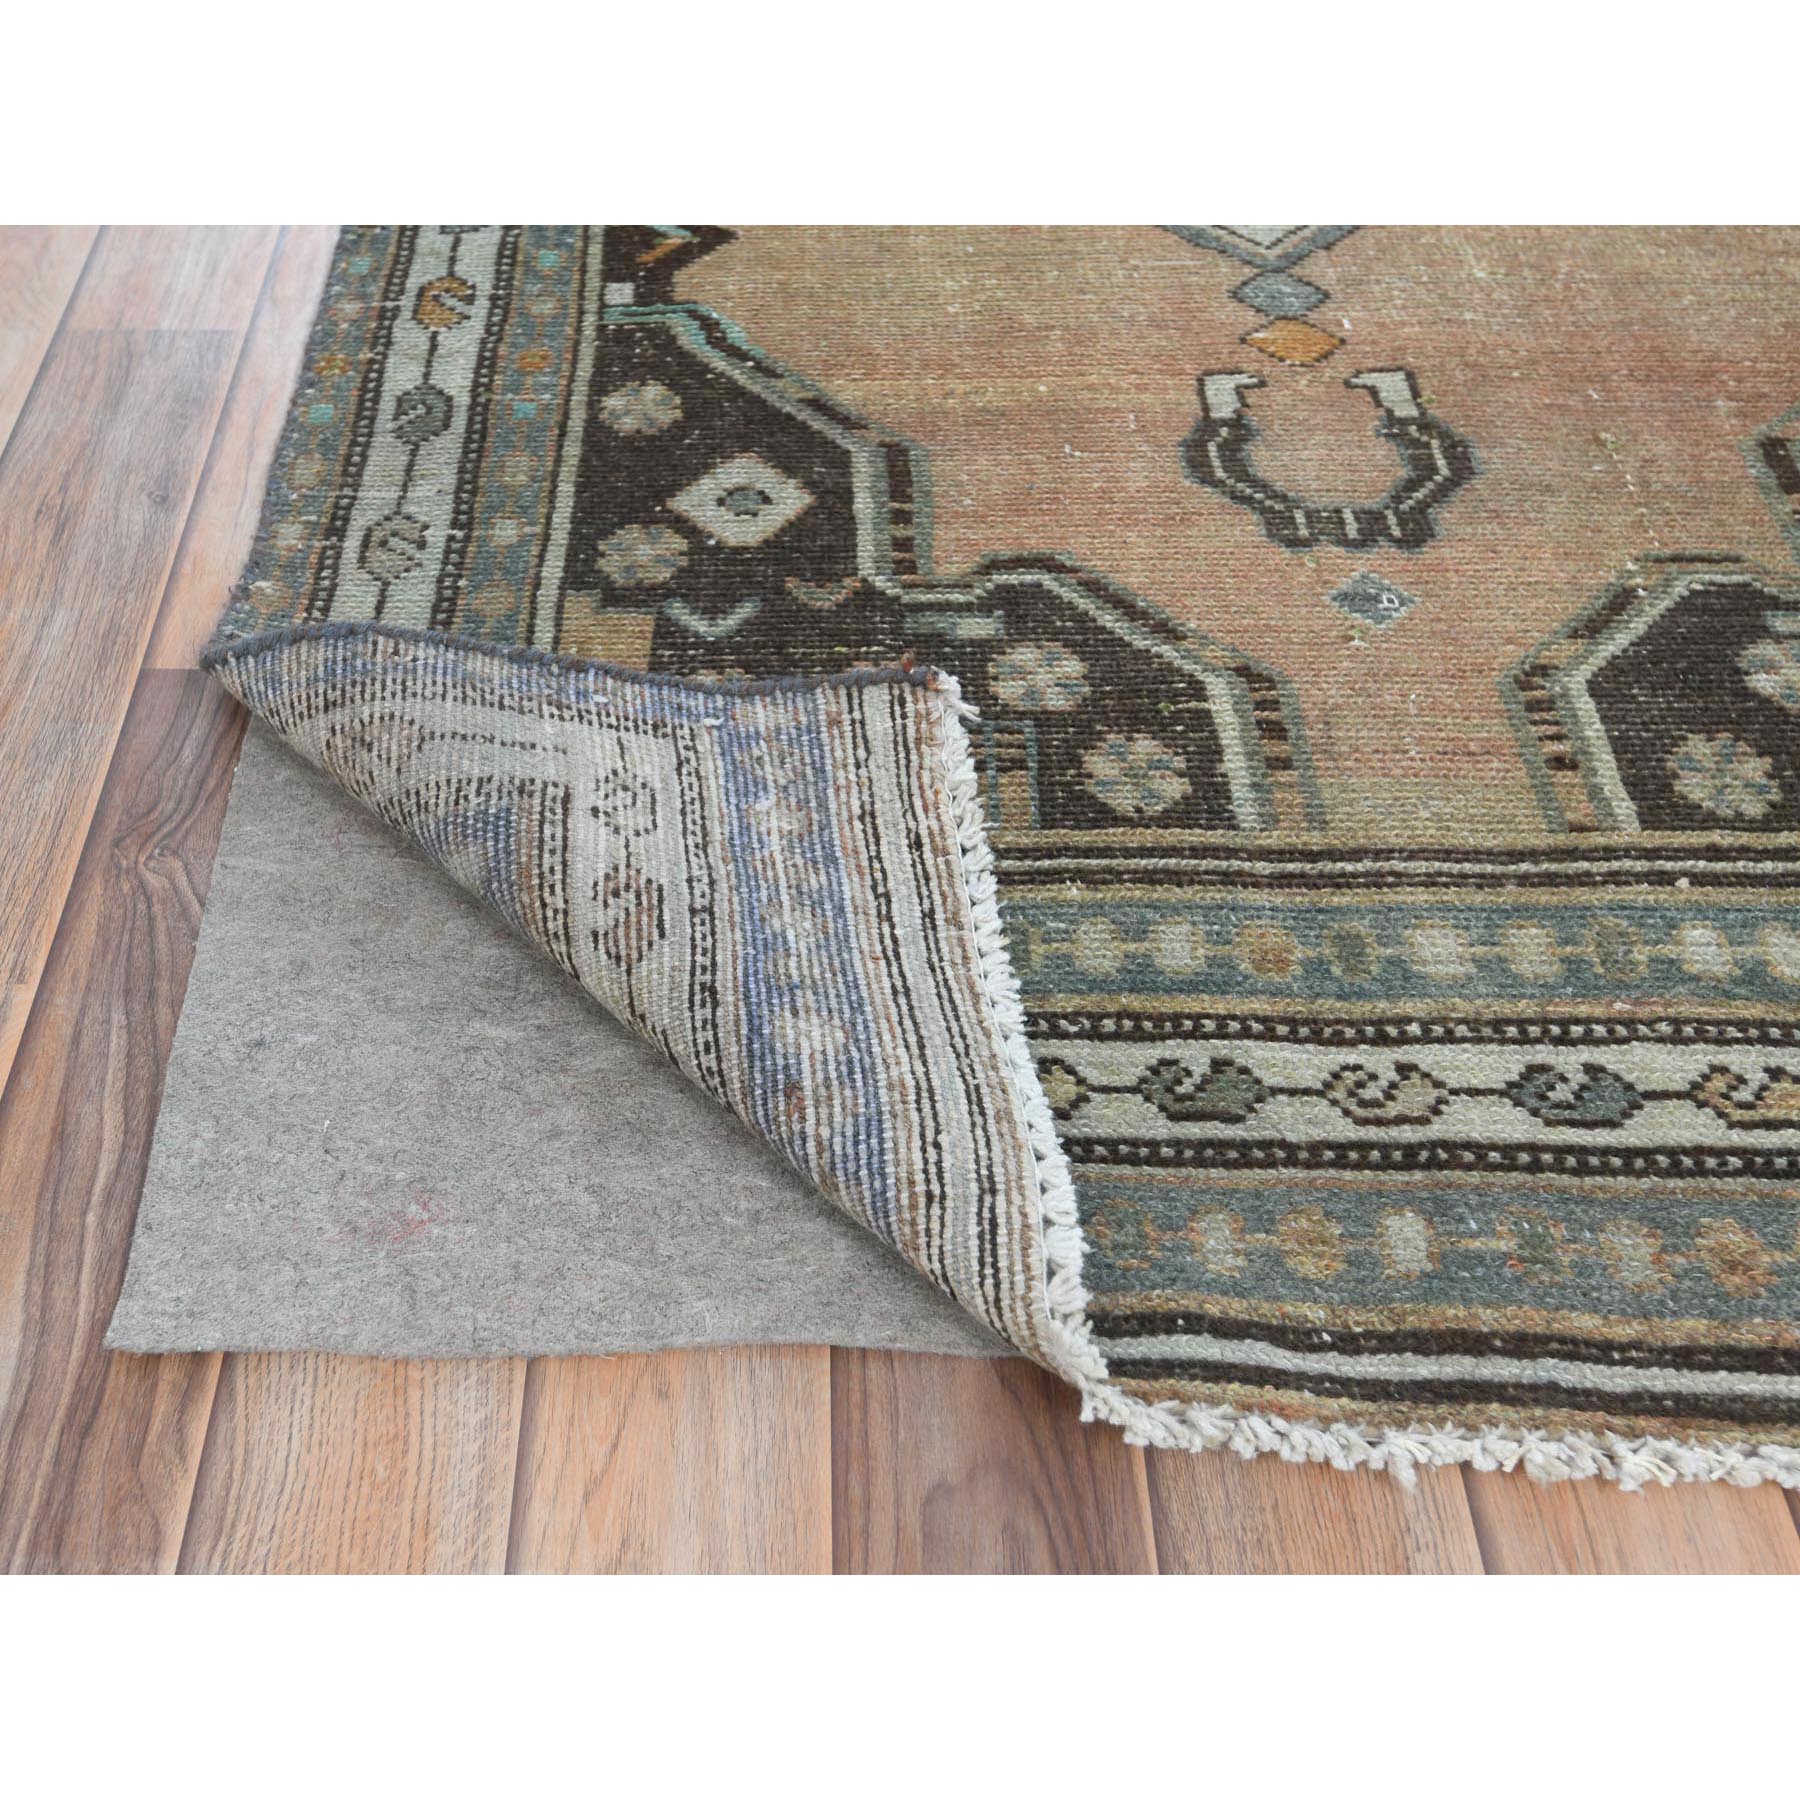 3'4"x9'7" Light Brown Pure Wool Vintage Persian Hamadan with Open Field and Large Element Medallion Design, Hand Woven, Distressed Look, Cropped Thin Wide Runner Oriental Rug 